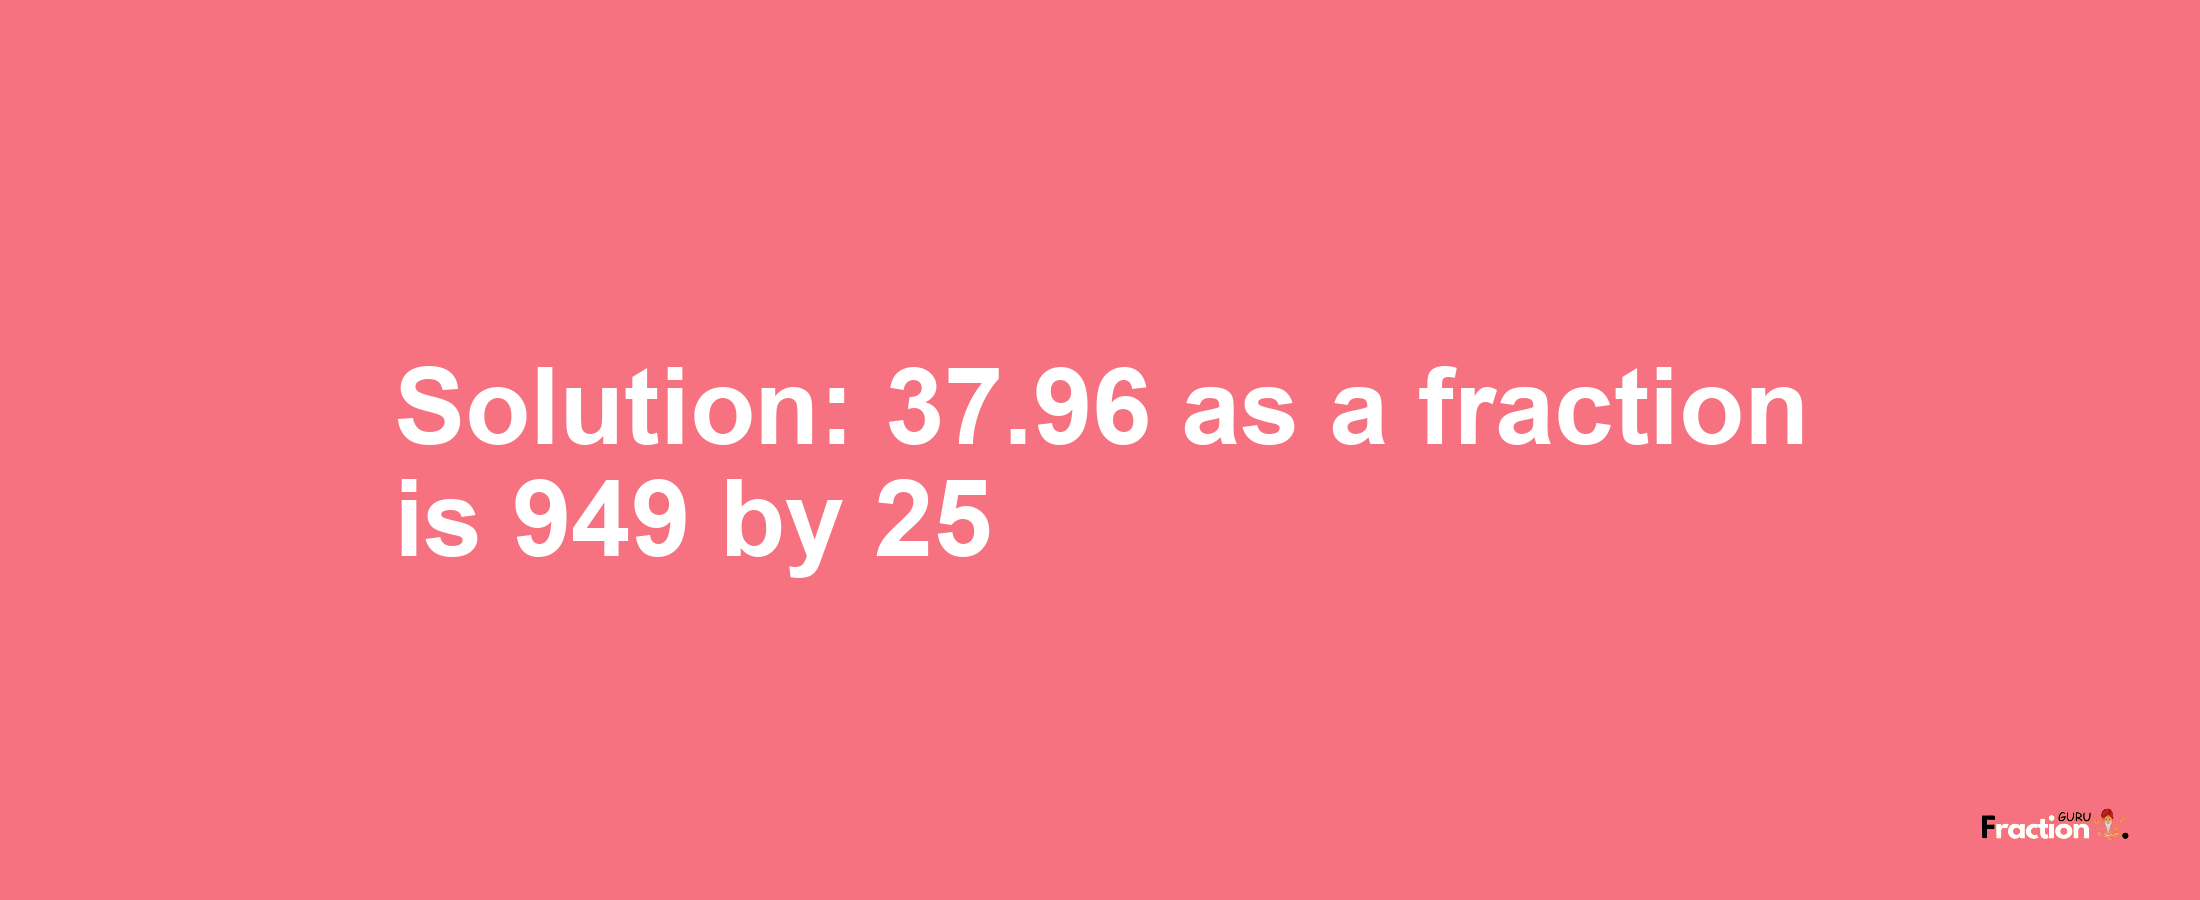 Solution:37.96 as a fraction is 949/25